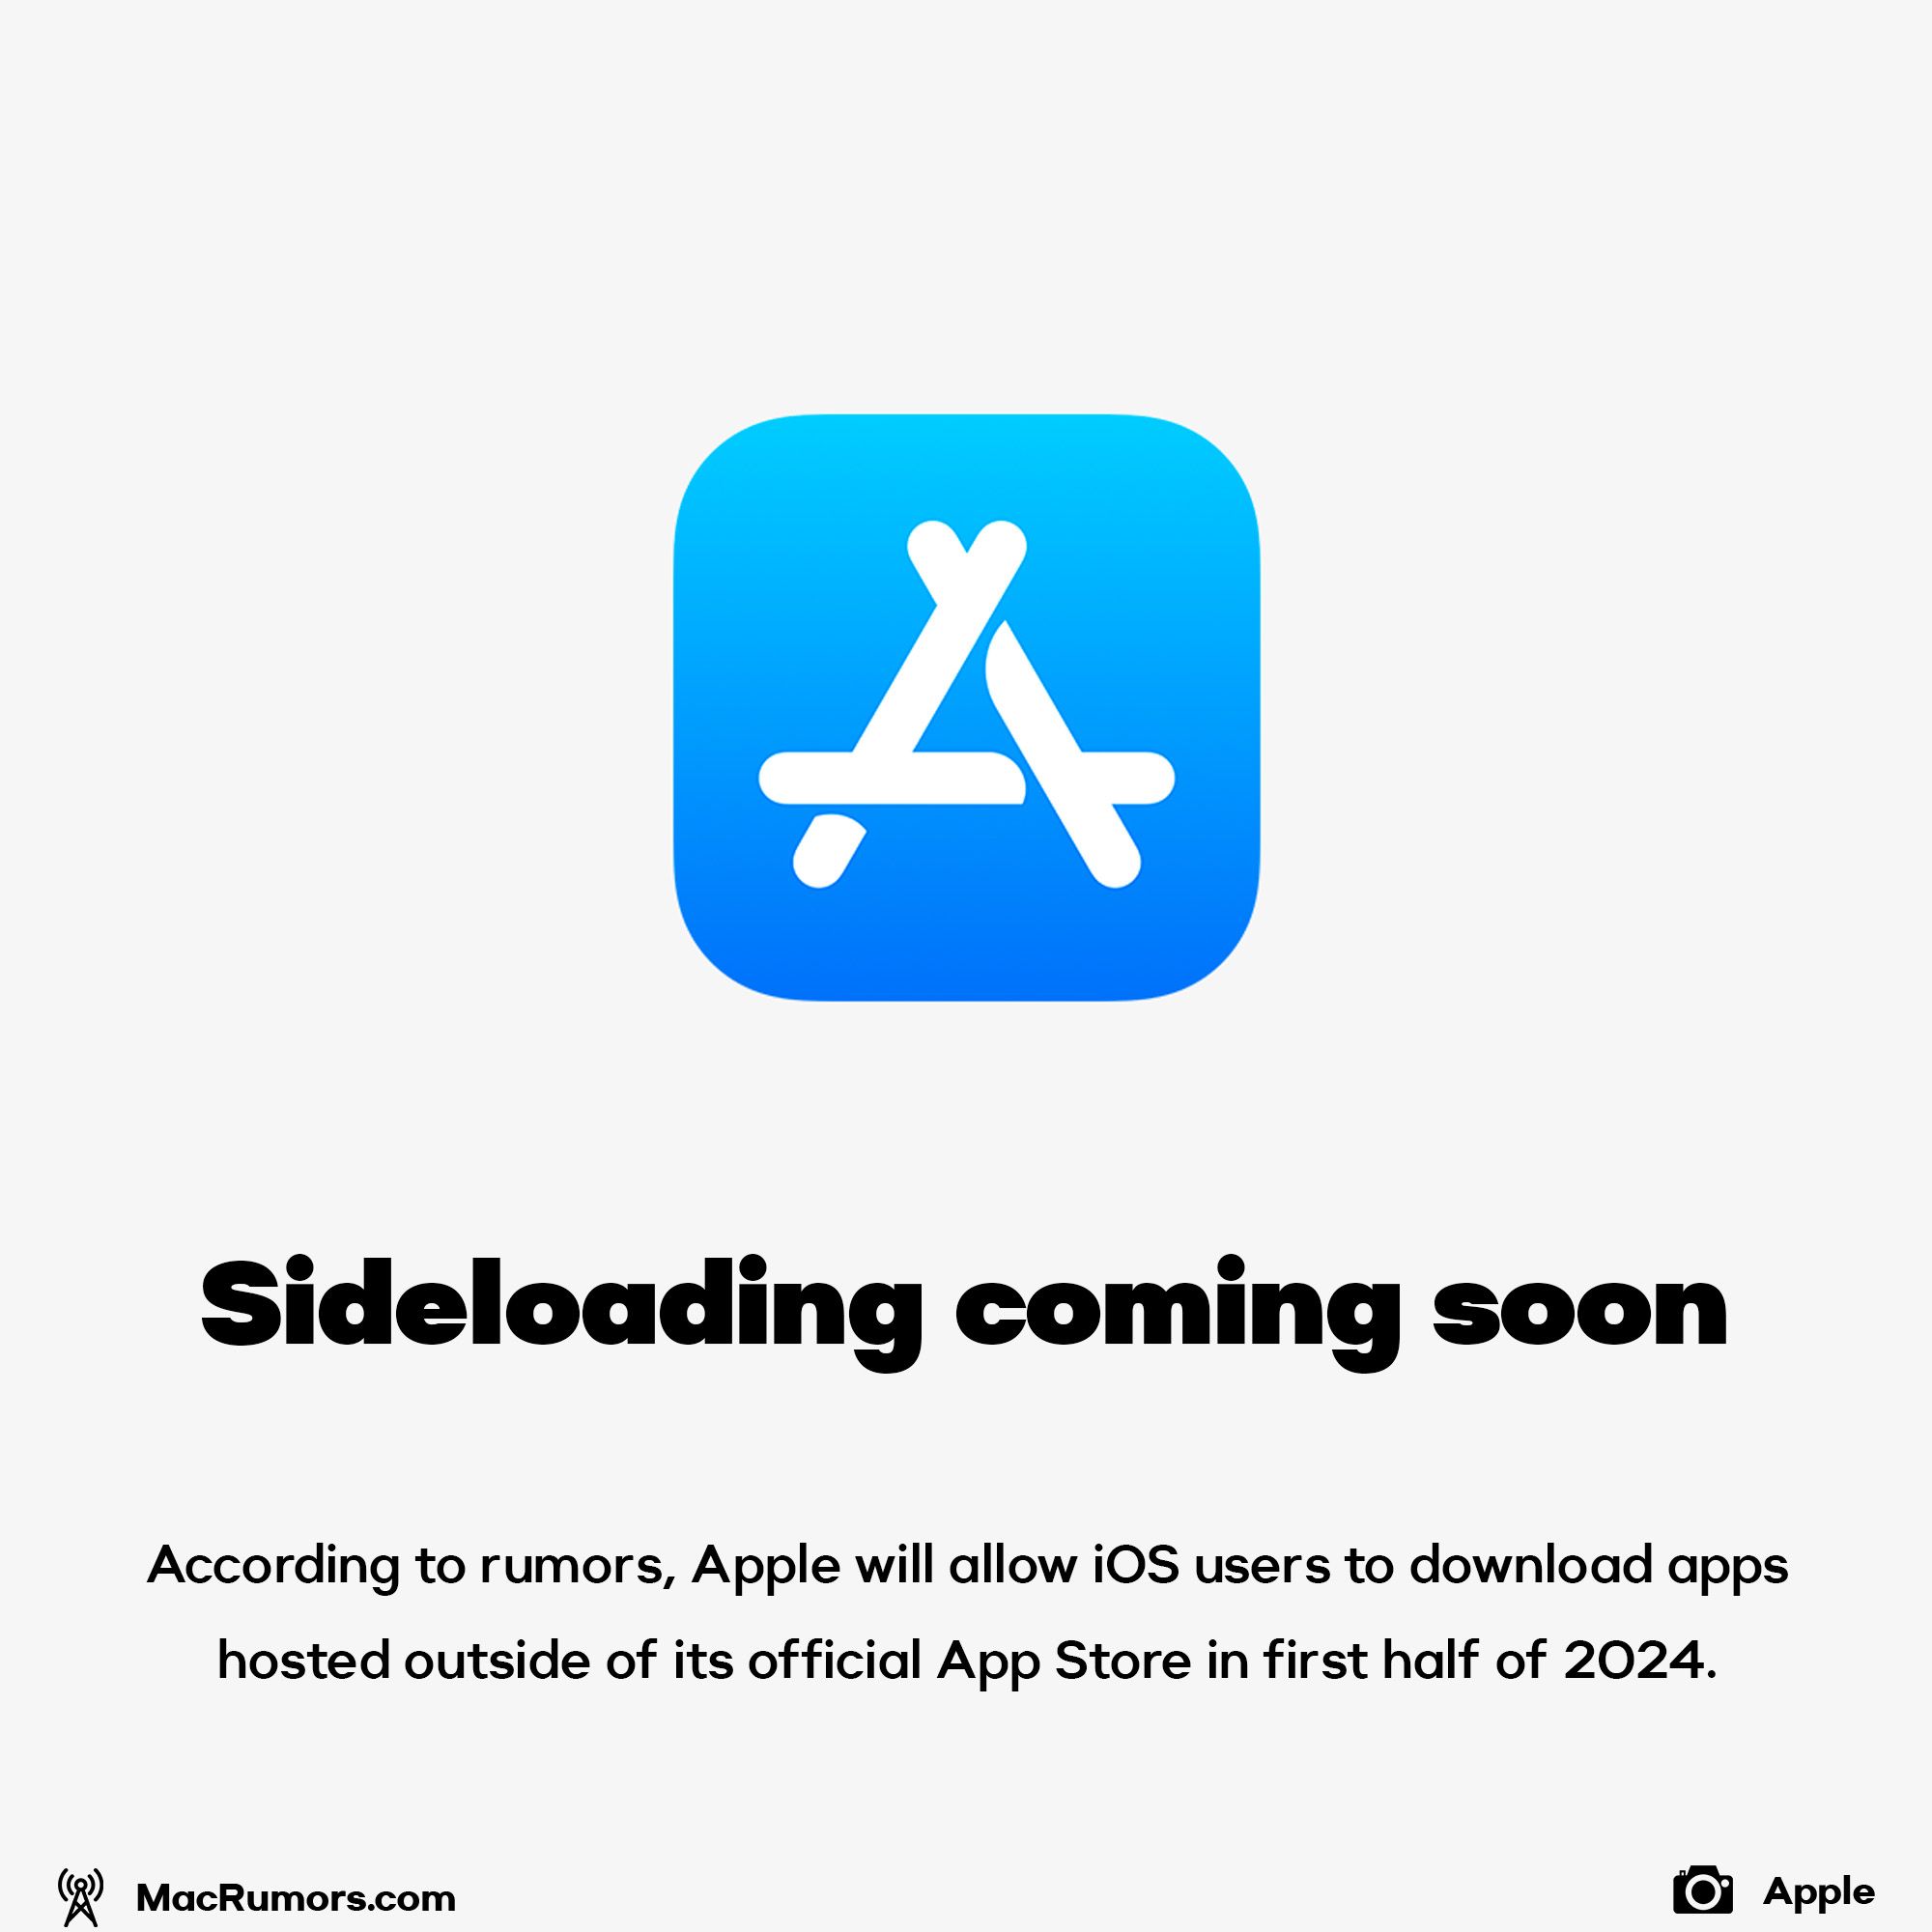 Sideloading coming soon to iOS